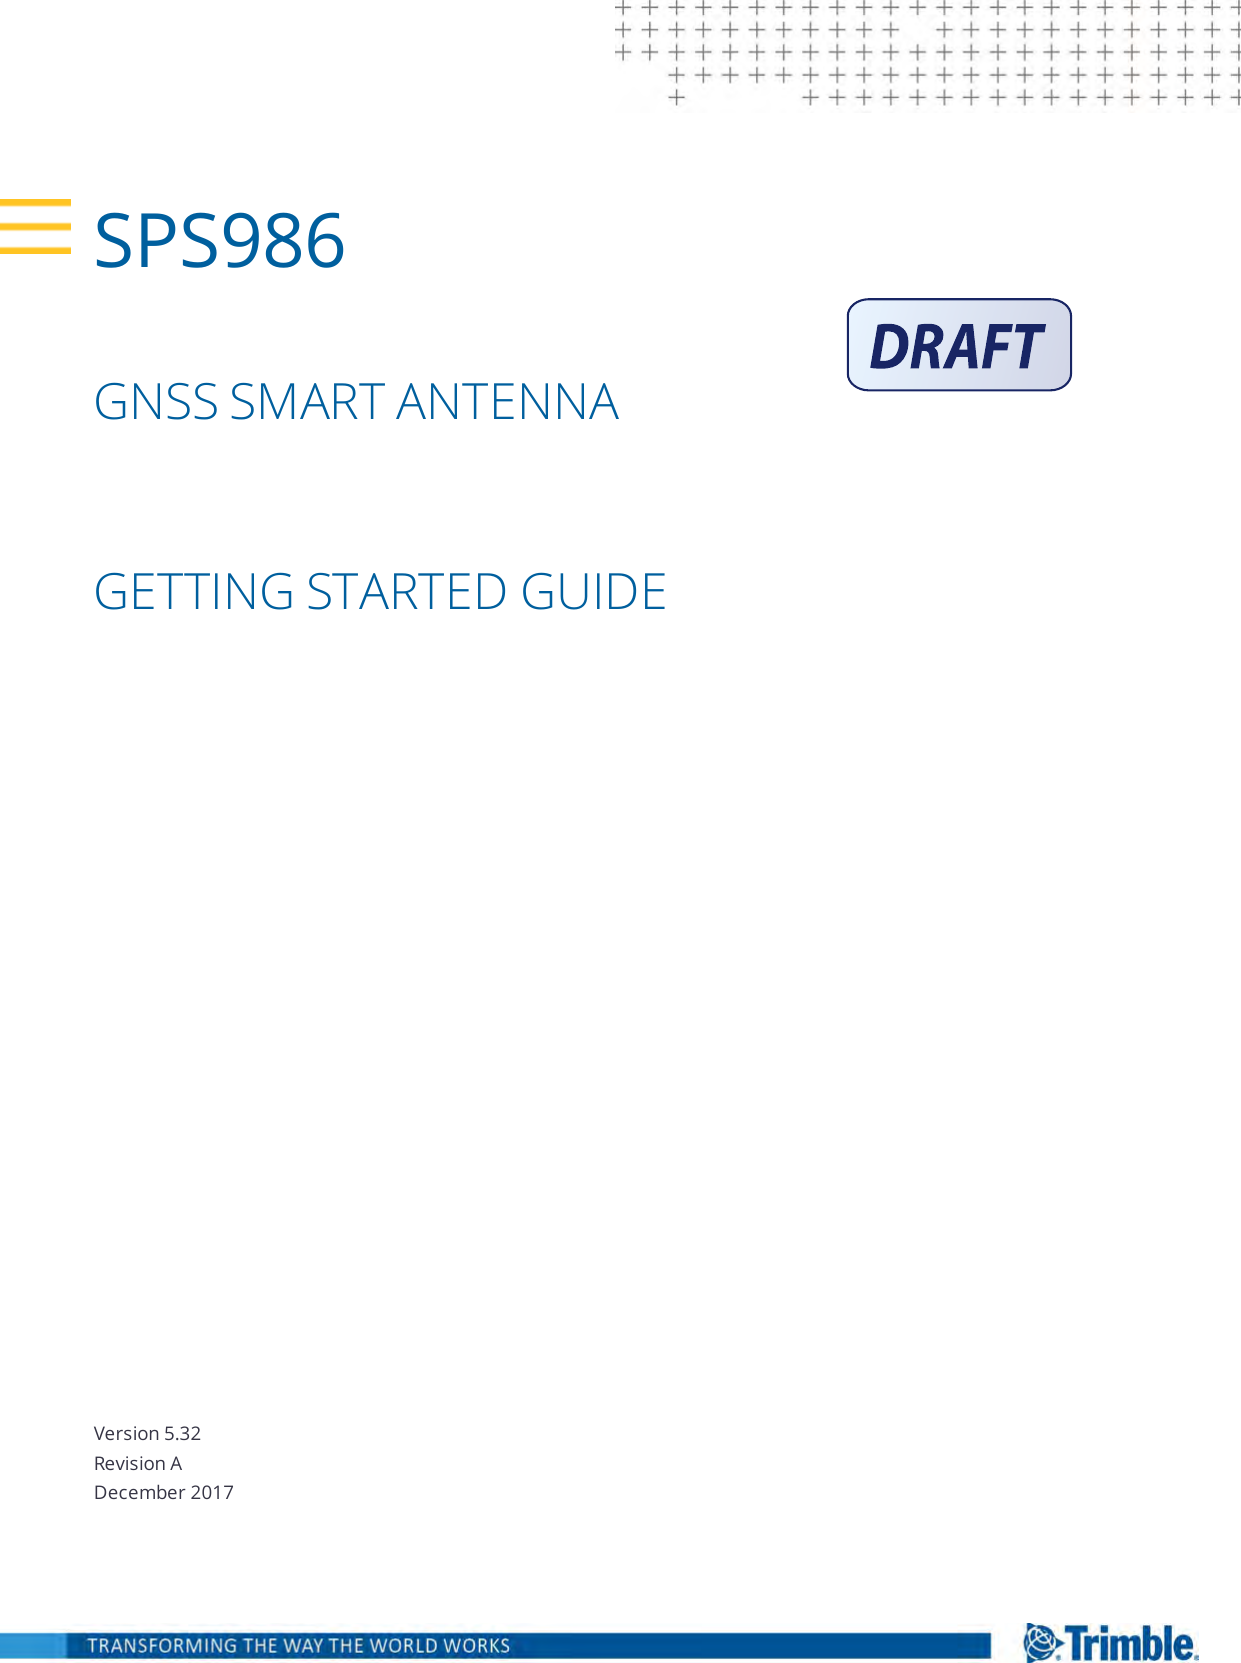 Version 5.32Revision ADecember 2017SPS986GNSS SMART ANTENNAGETTING STARTED GUIDE